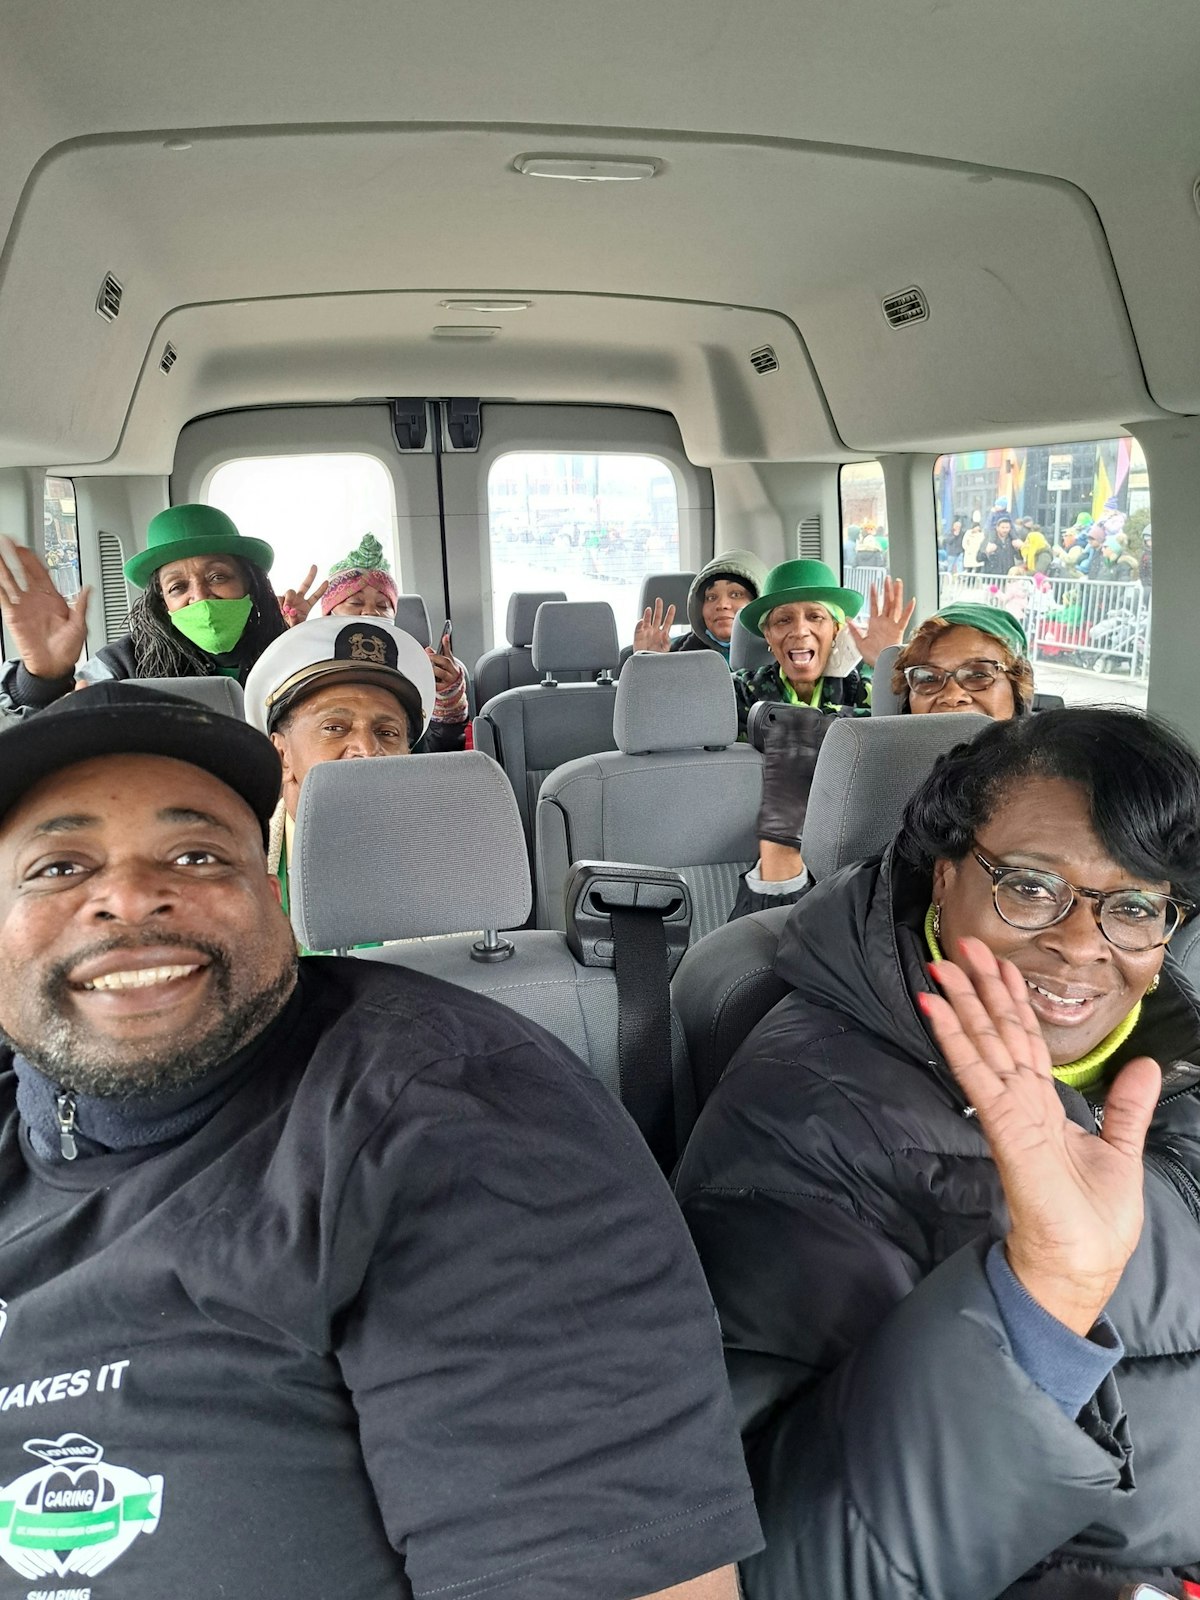 St. Patrick Senior Center staffers and volunteers participate in Detroit's St. Patrick's Day Parade in March.